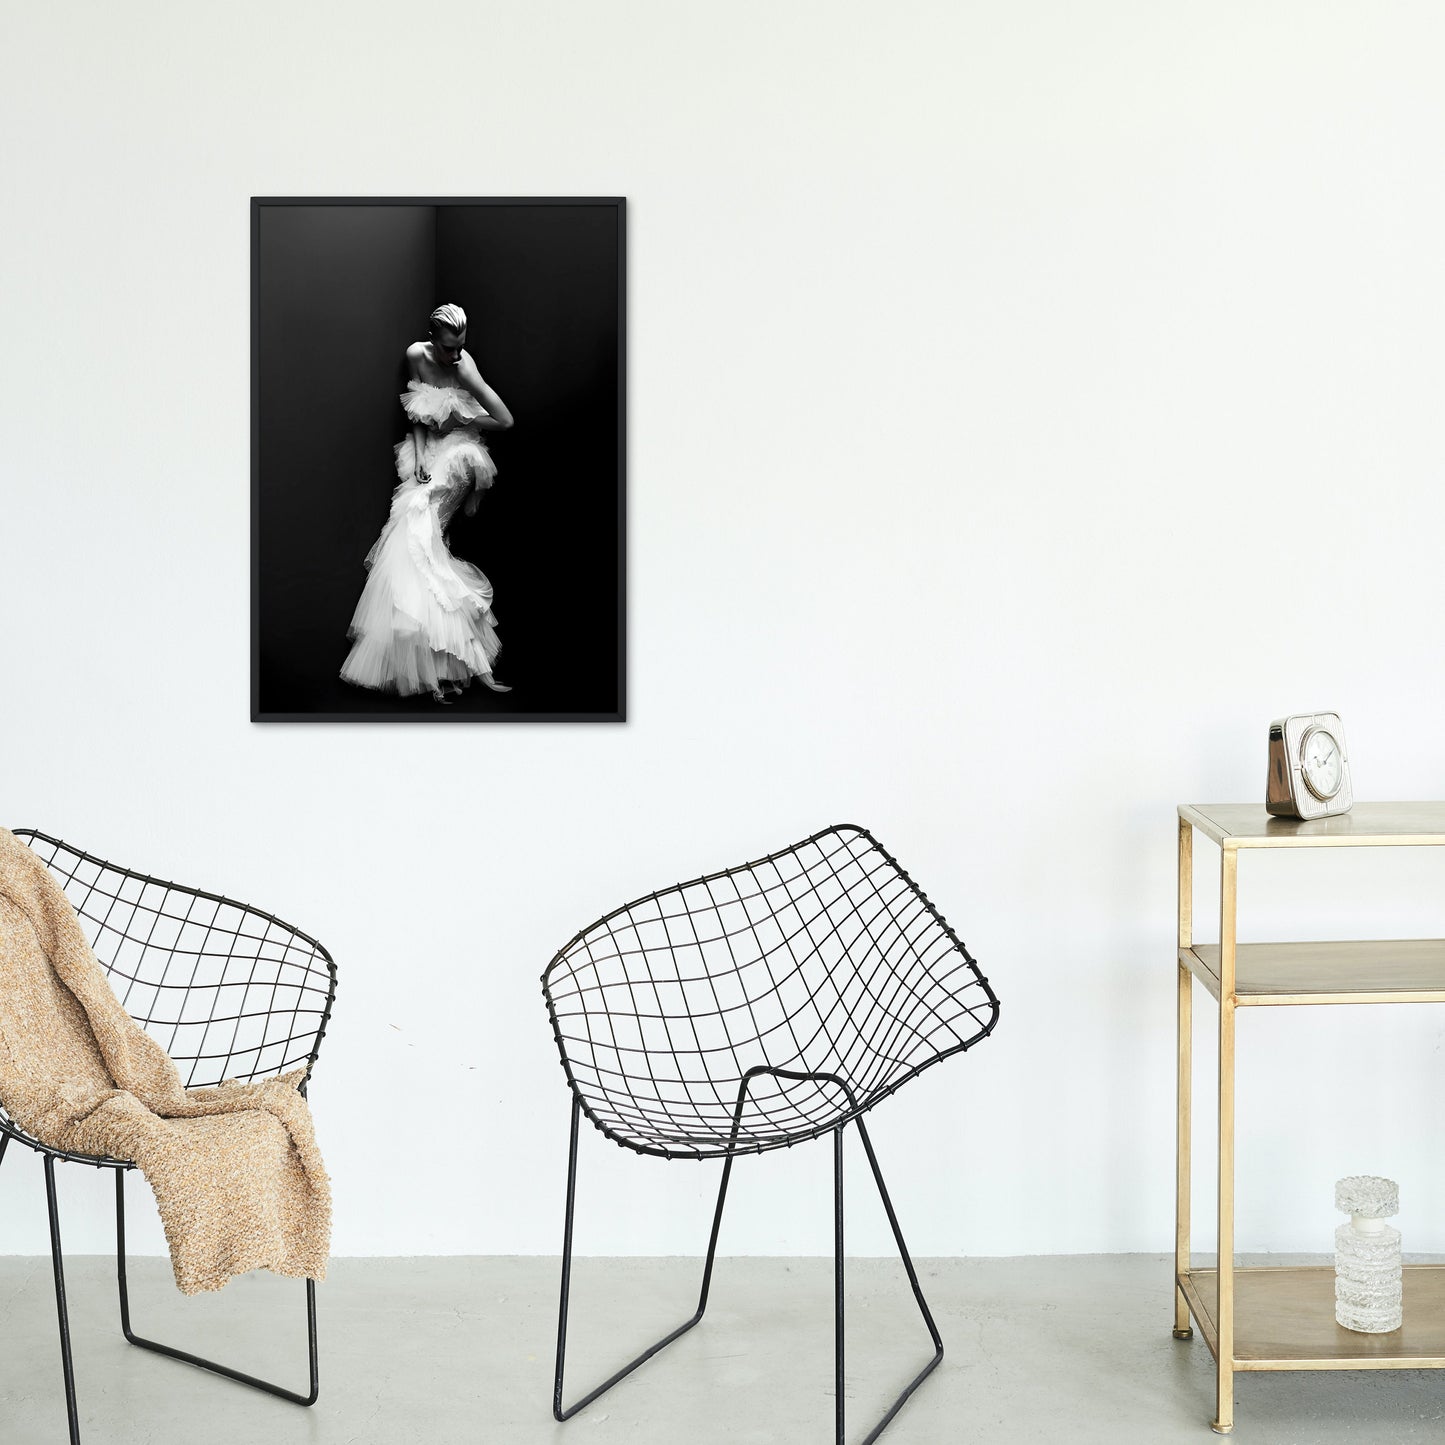 Set of 5 Fashion Photography Luxury Wall Art INSTANT DOWNLOAD, Designer prints, Chanel Poster, Classy Black and White Prints, Poster Fashion